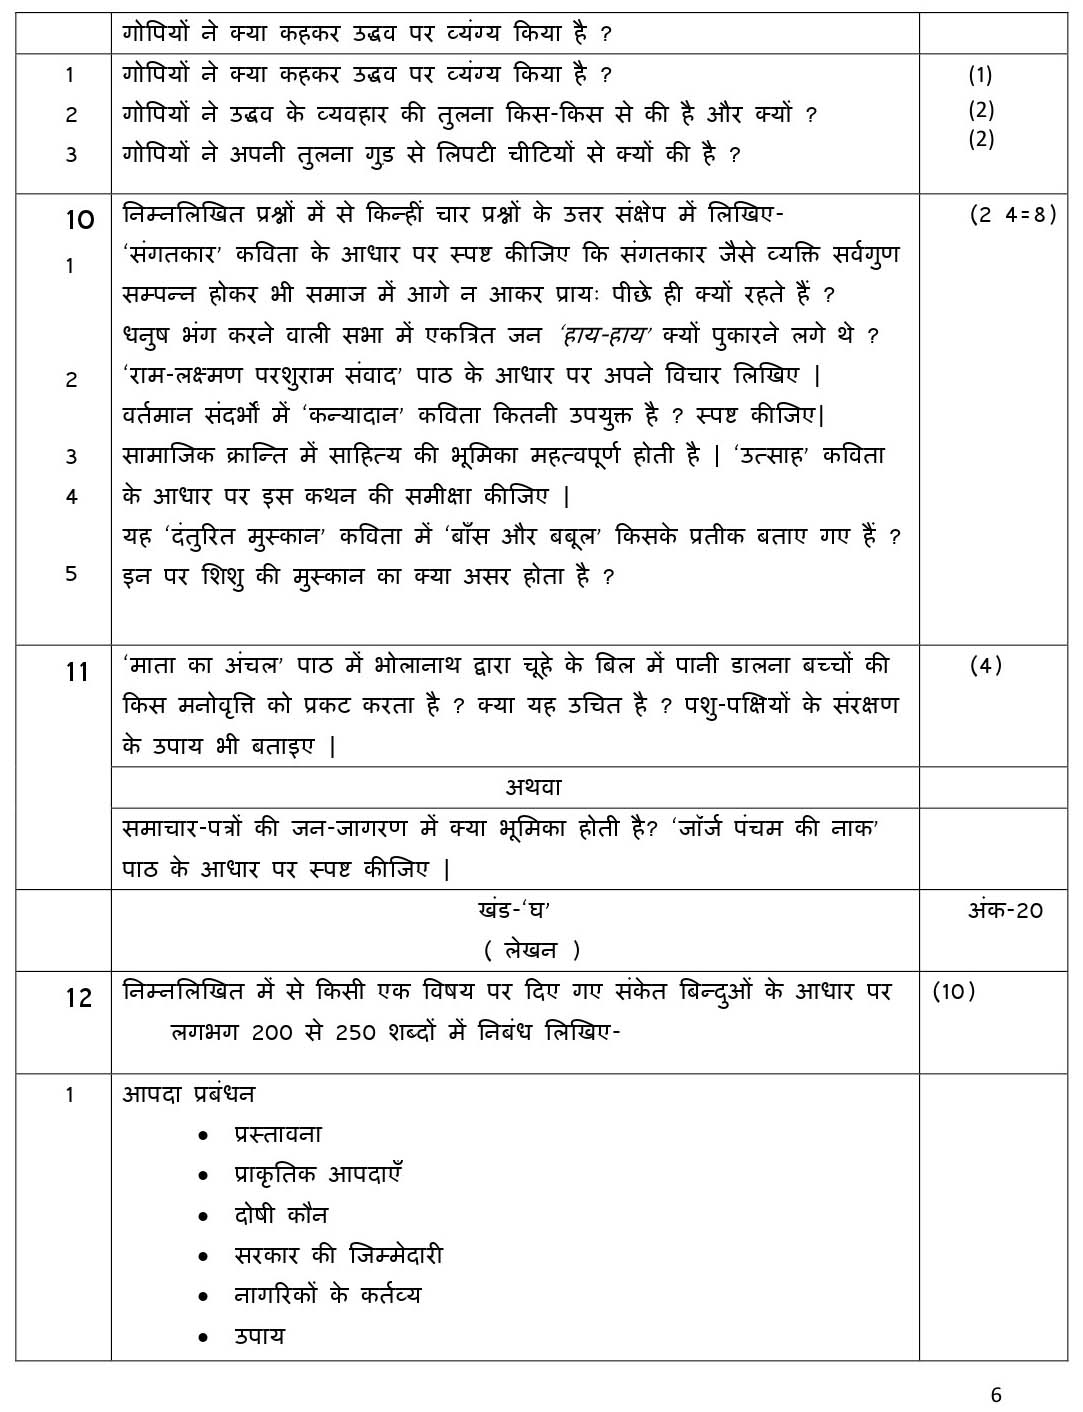 Hindi A CBSE Class X Sample Question Paper 2018-19 - Image 6